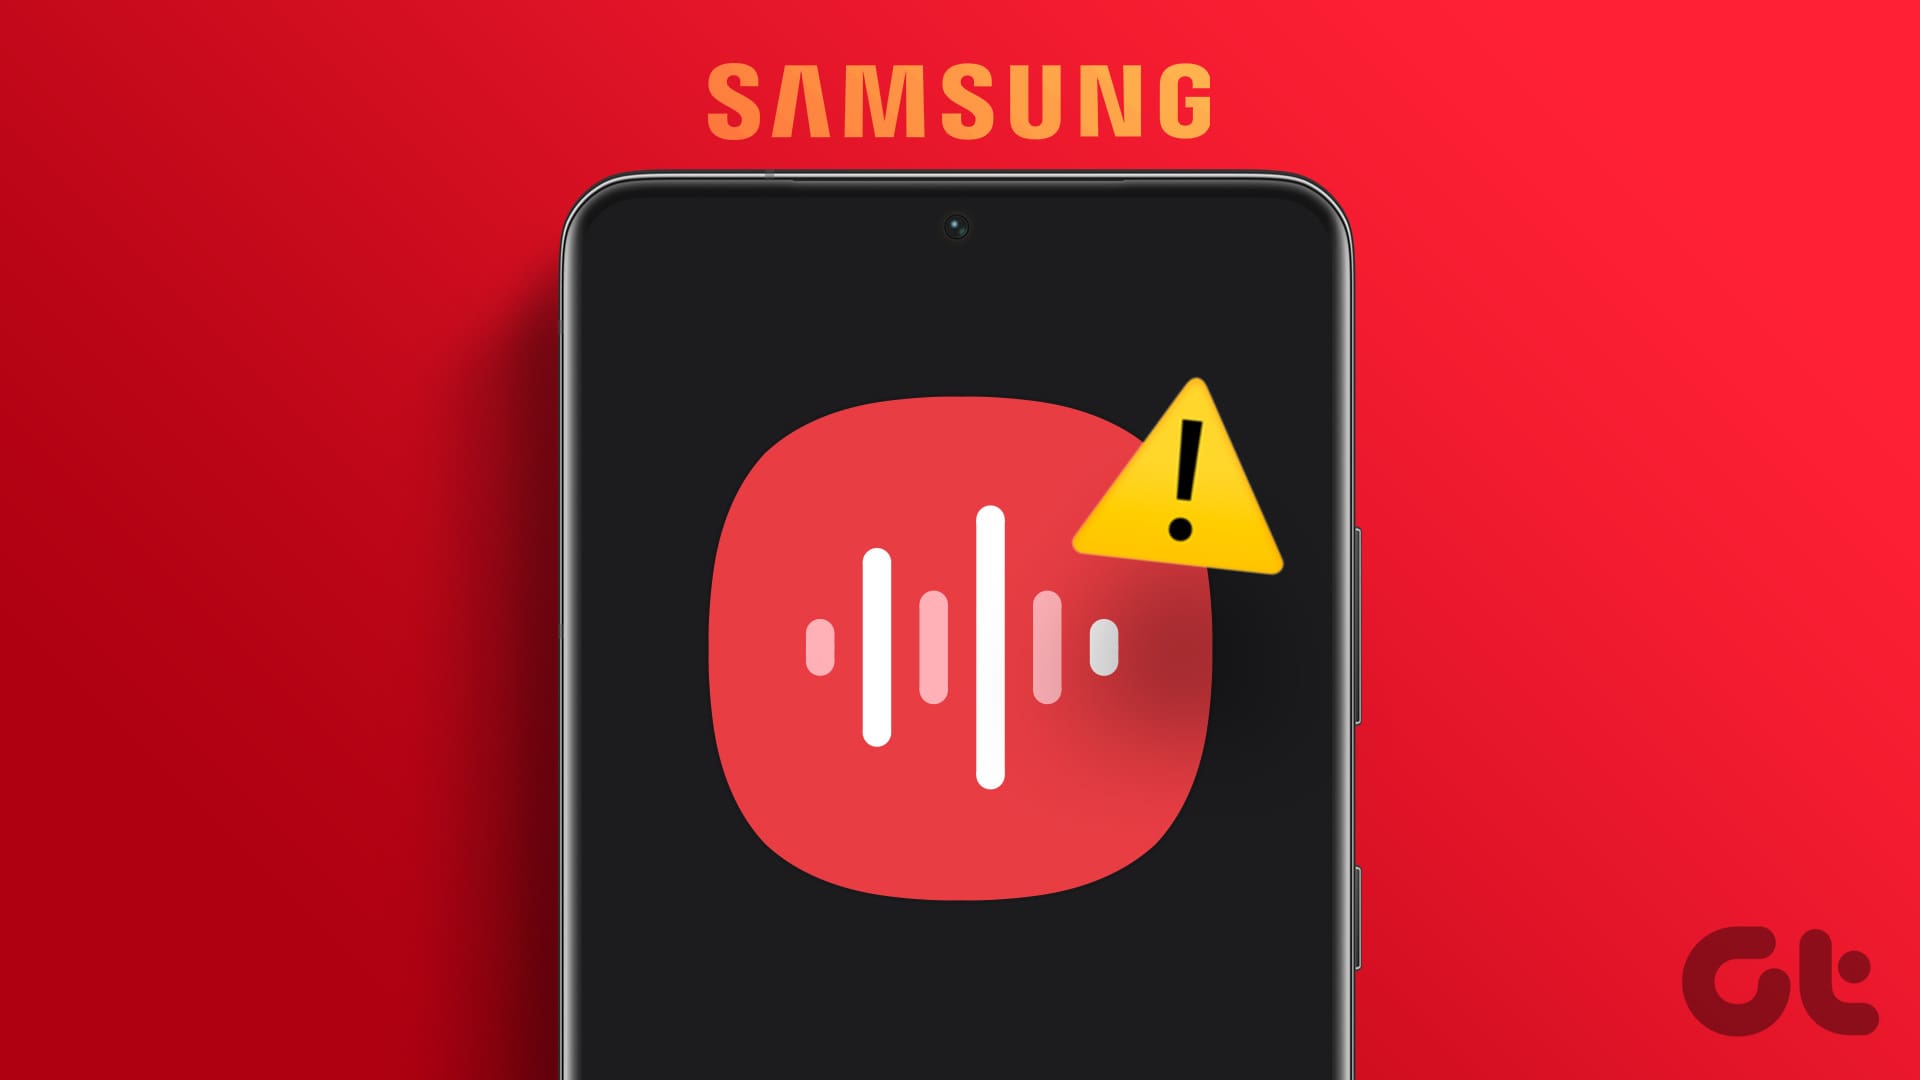 How to Easily Record Audio on a Samsung Galaxy S10